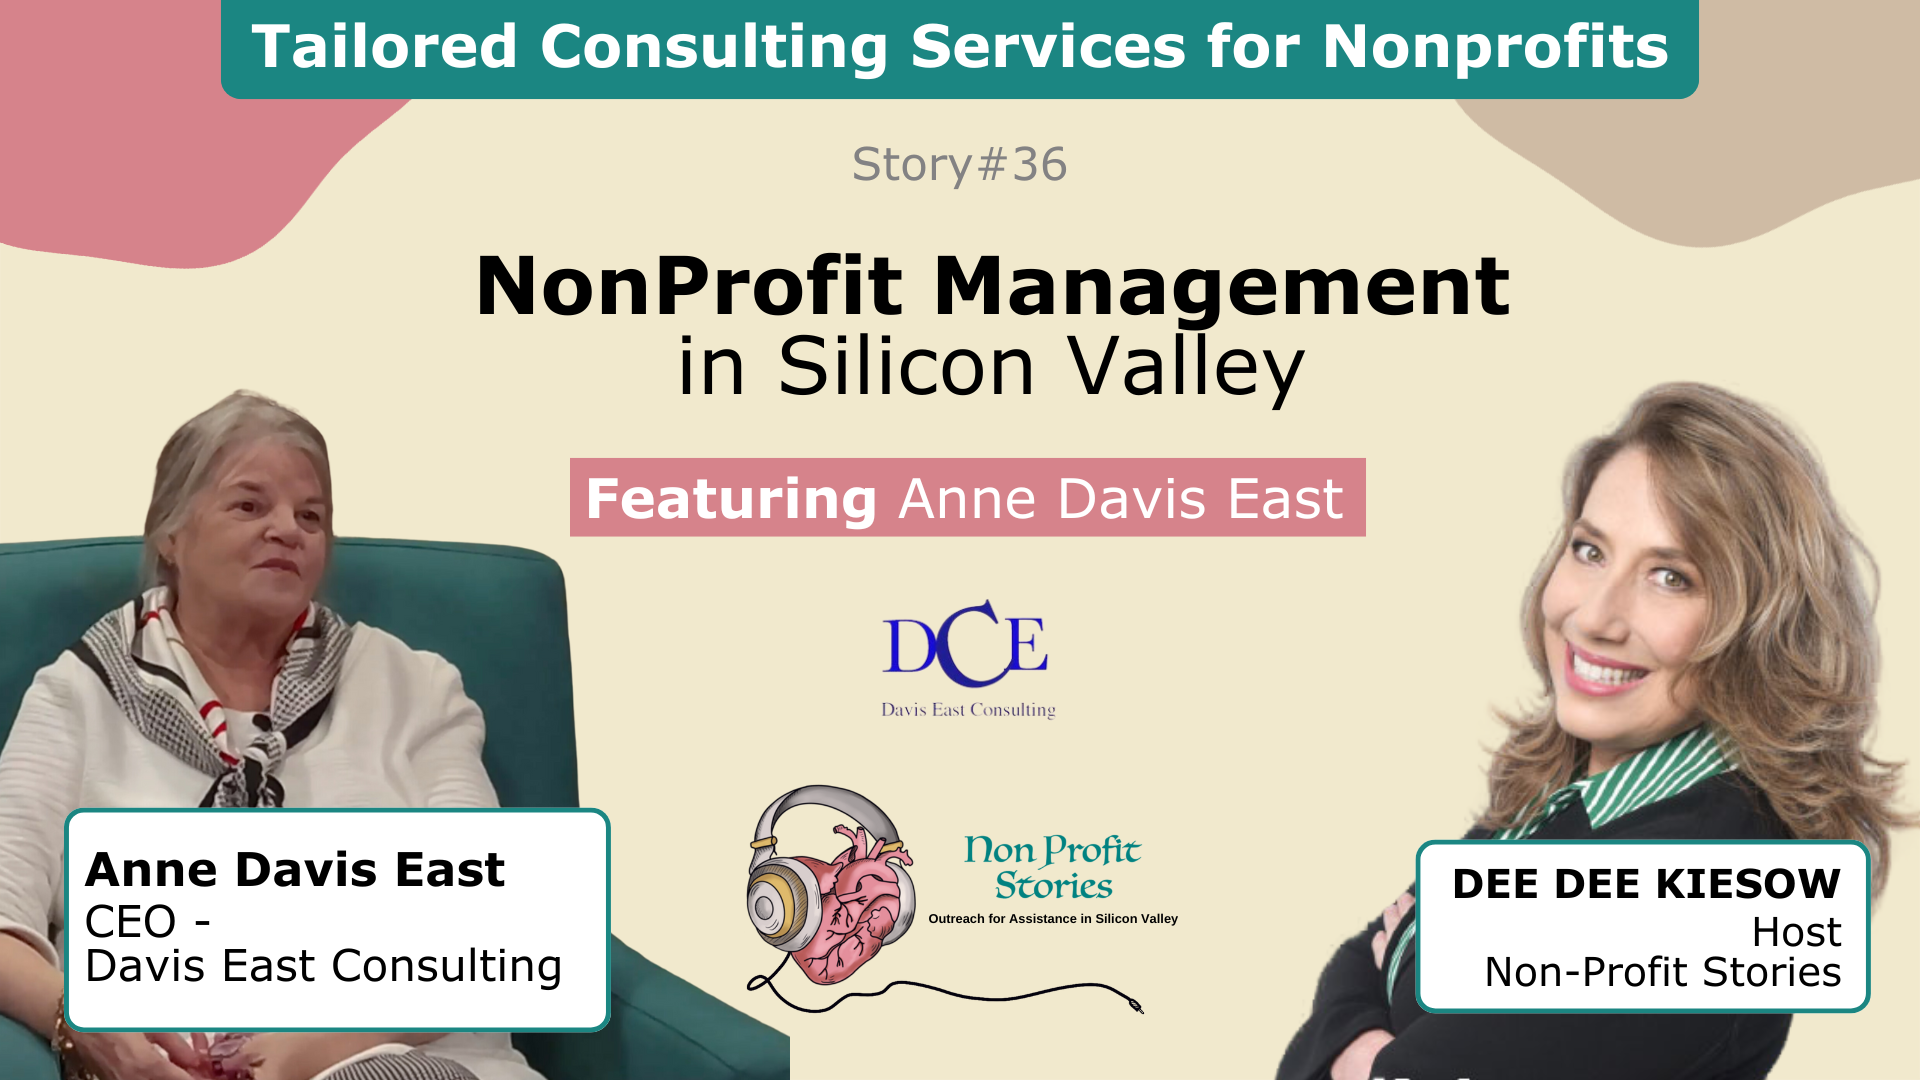 Nonprofit Management: Tailored Consulting Services for Nonprofits in Silicon Valley Video